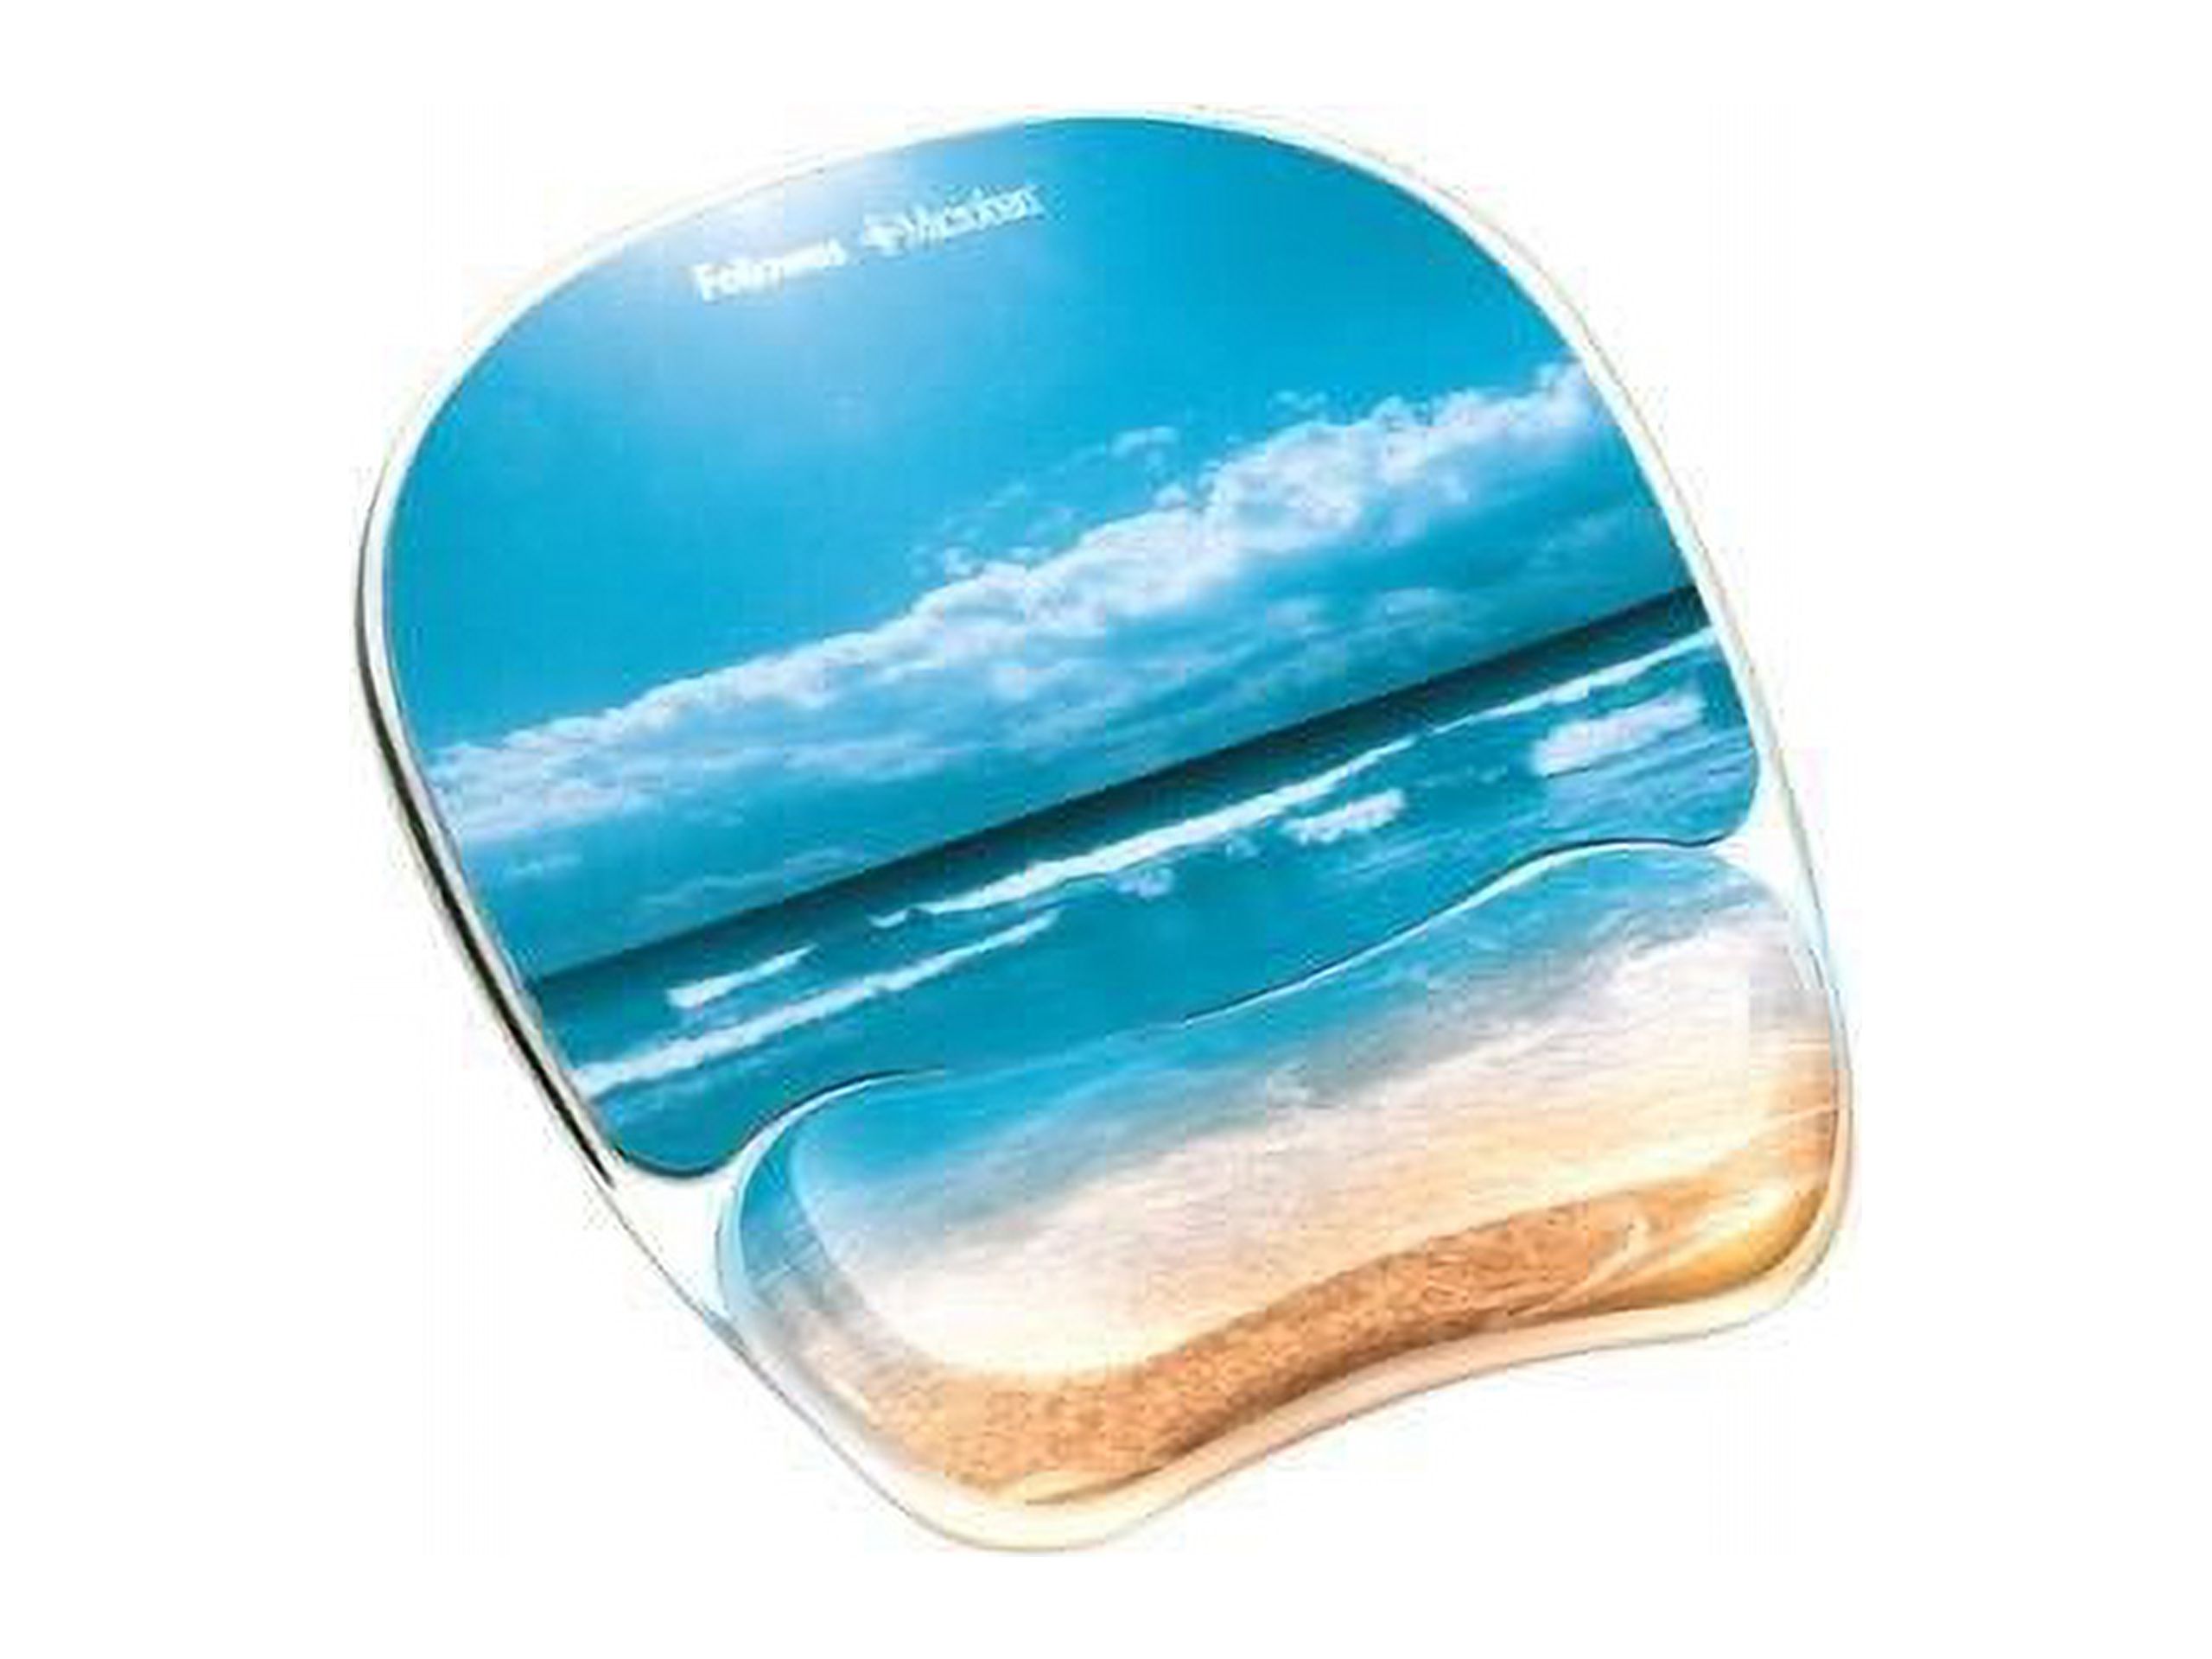 Fellowes Photo Gel Mouse Pad Wrist Rest with Microban Protection - image 1 of 3